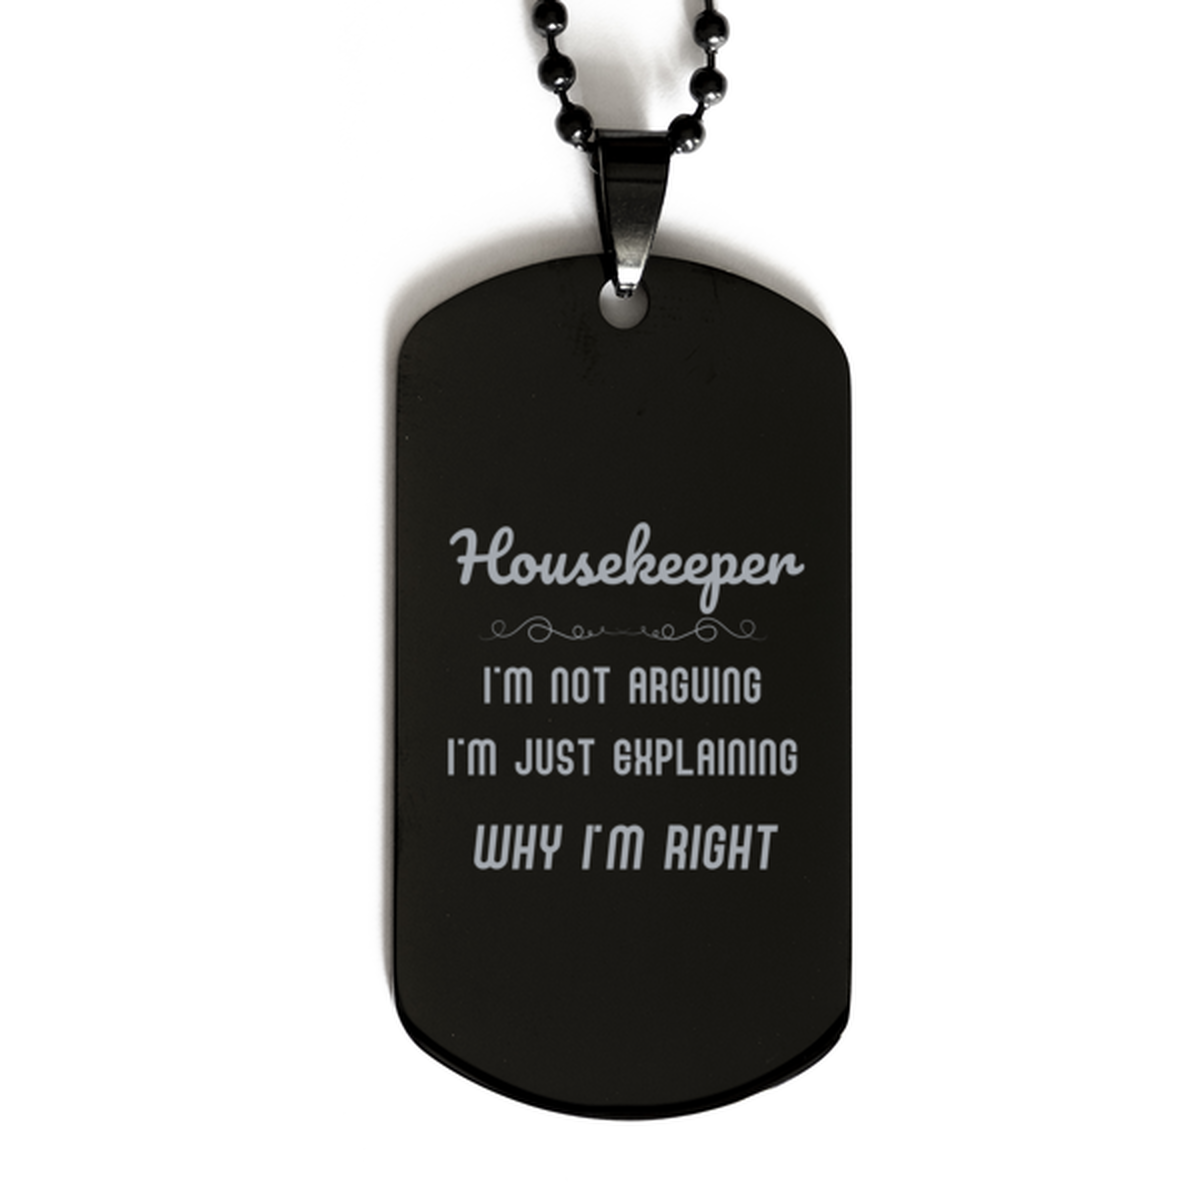 Housekeeper I'm not Arguing. I'm Just Explaining Why I'm RIGHT Black Dog Tag, Funny Saying Quote Housekeeper Gifts For Housekeeper Graduation Birthday Christmas Gifts for Men Women Coworker